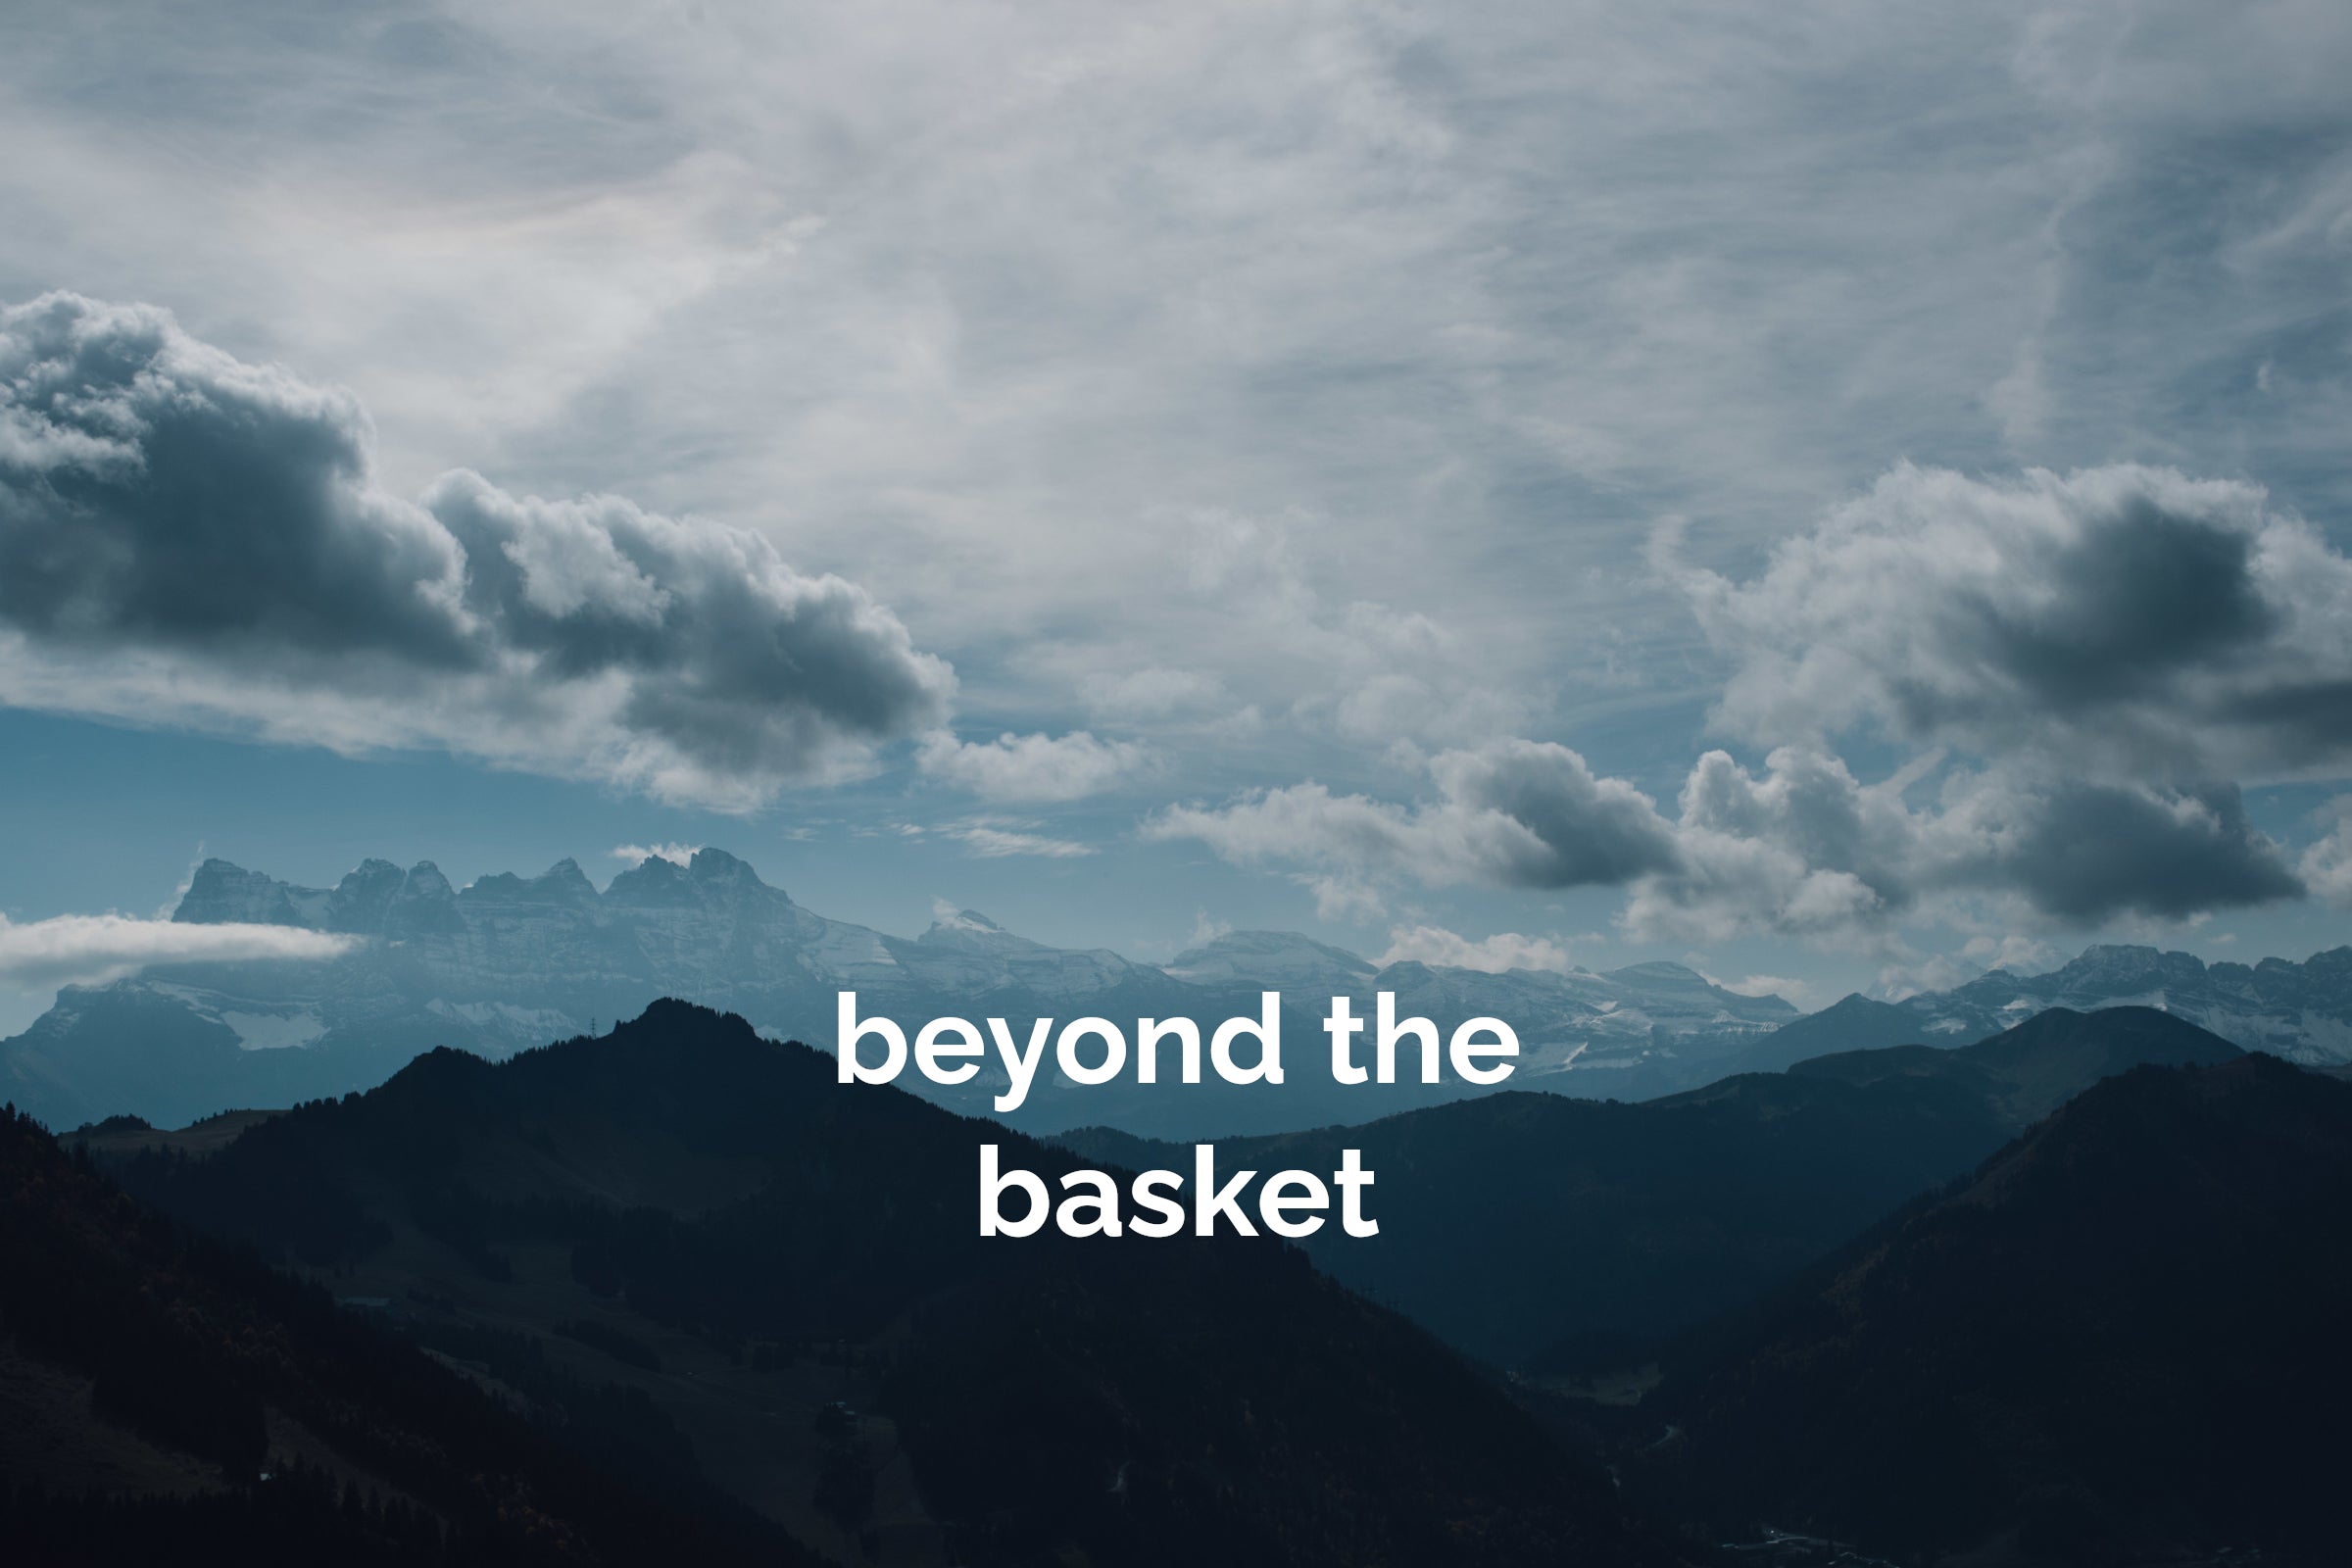 A mountain landscape under a cloudy sky with the phrase "beyond the basket" overlaid in the center in white text